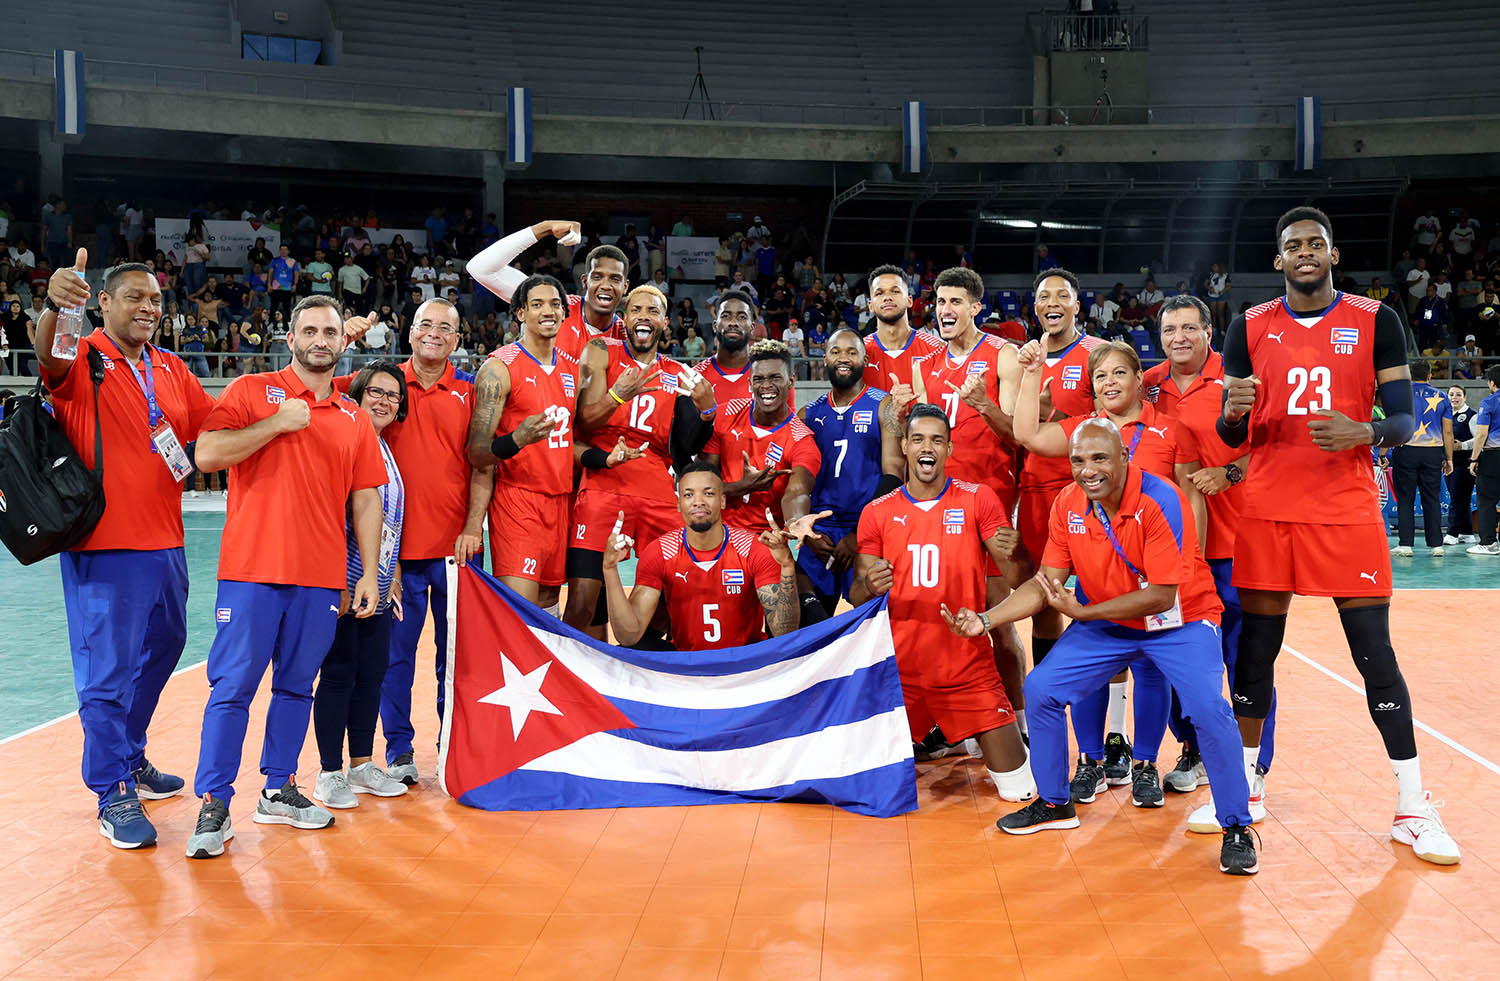 Cuba books first ticket to the Gold Medal Match at San Salvador CAC Games